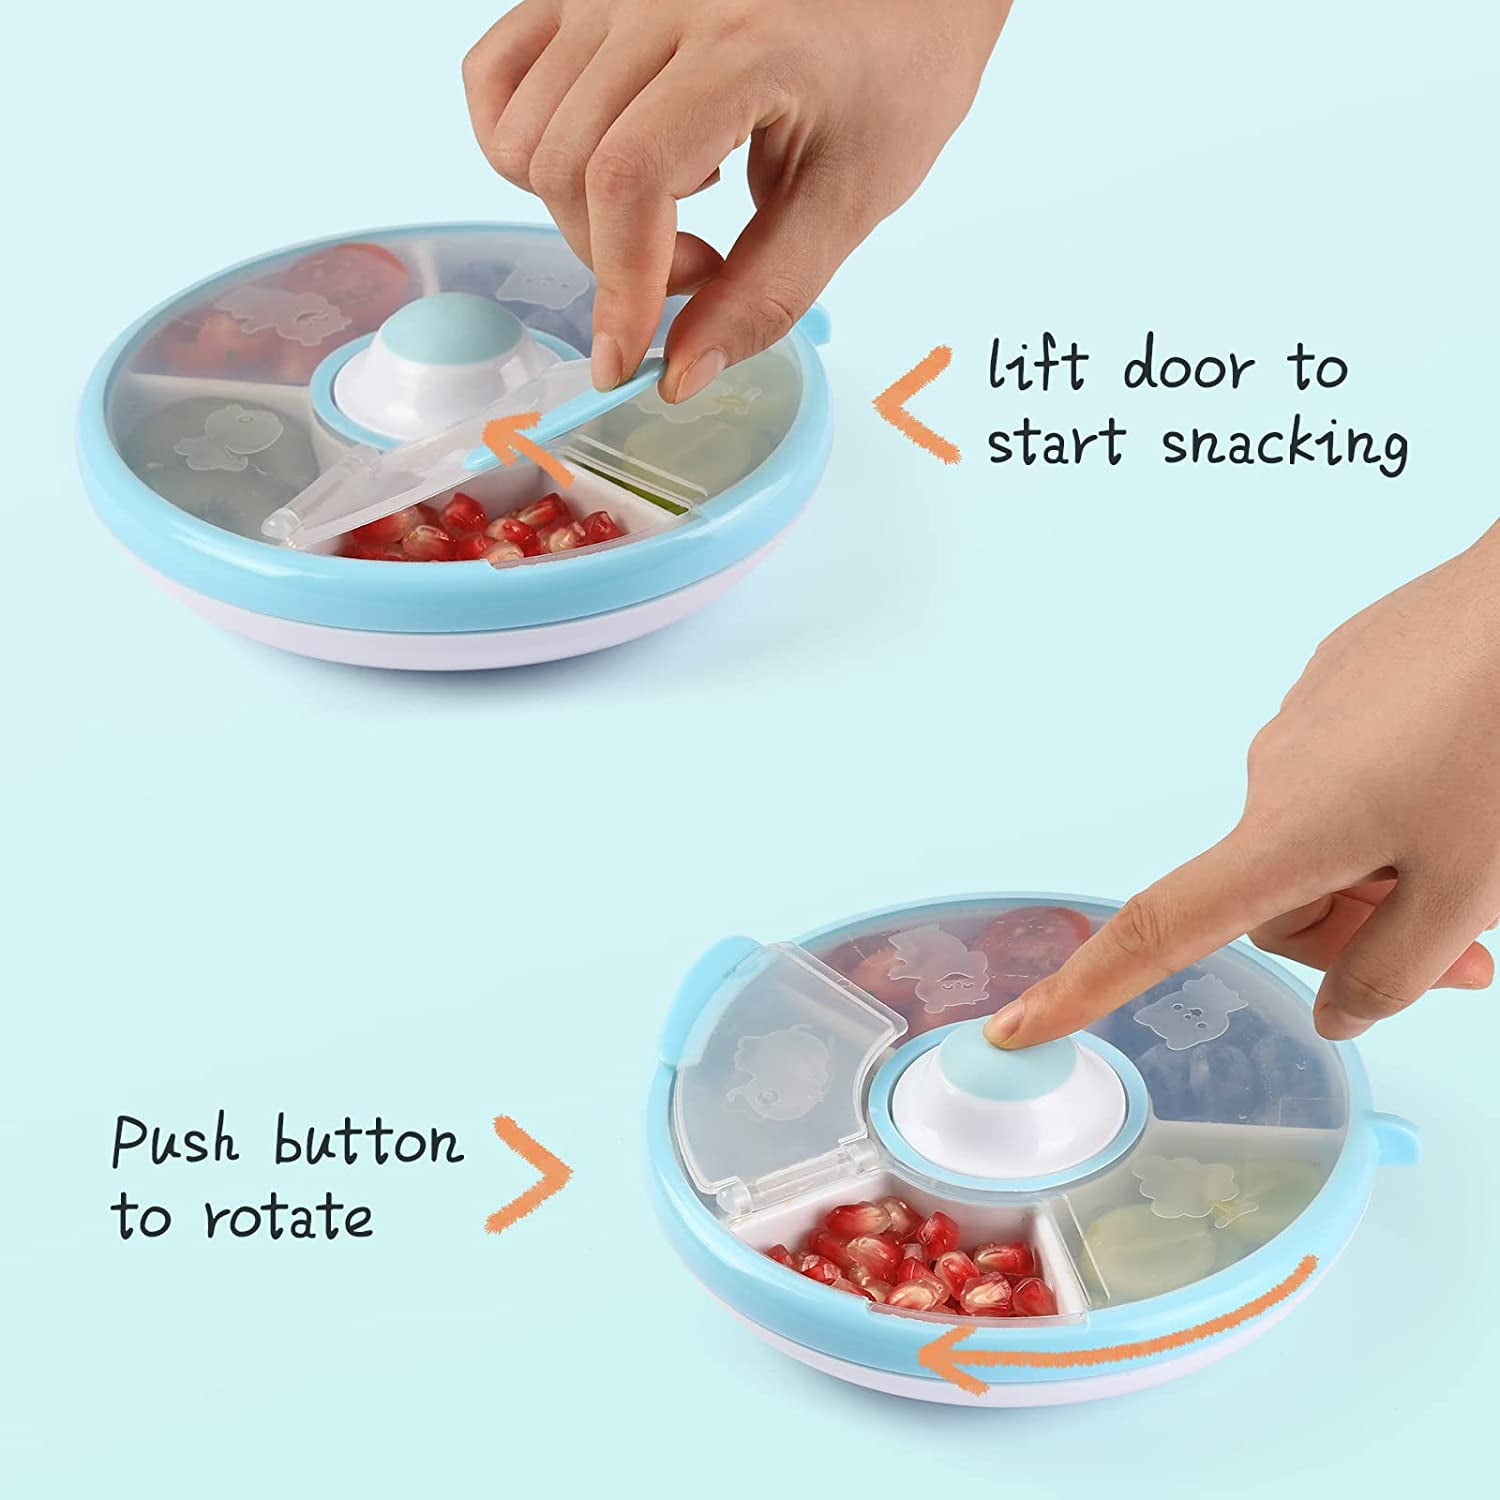 Cowiewie Snack Container for Kids with Lid, 5 Compartments, BPA and PVC Free Kids Snack Spinner, Blue, Size: 6.7 x 6.7 x 1.6